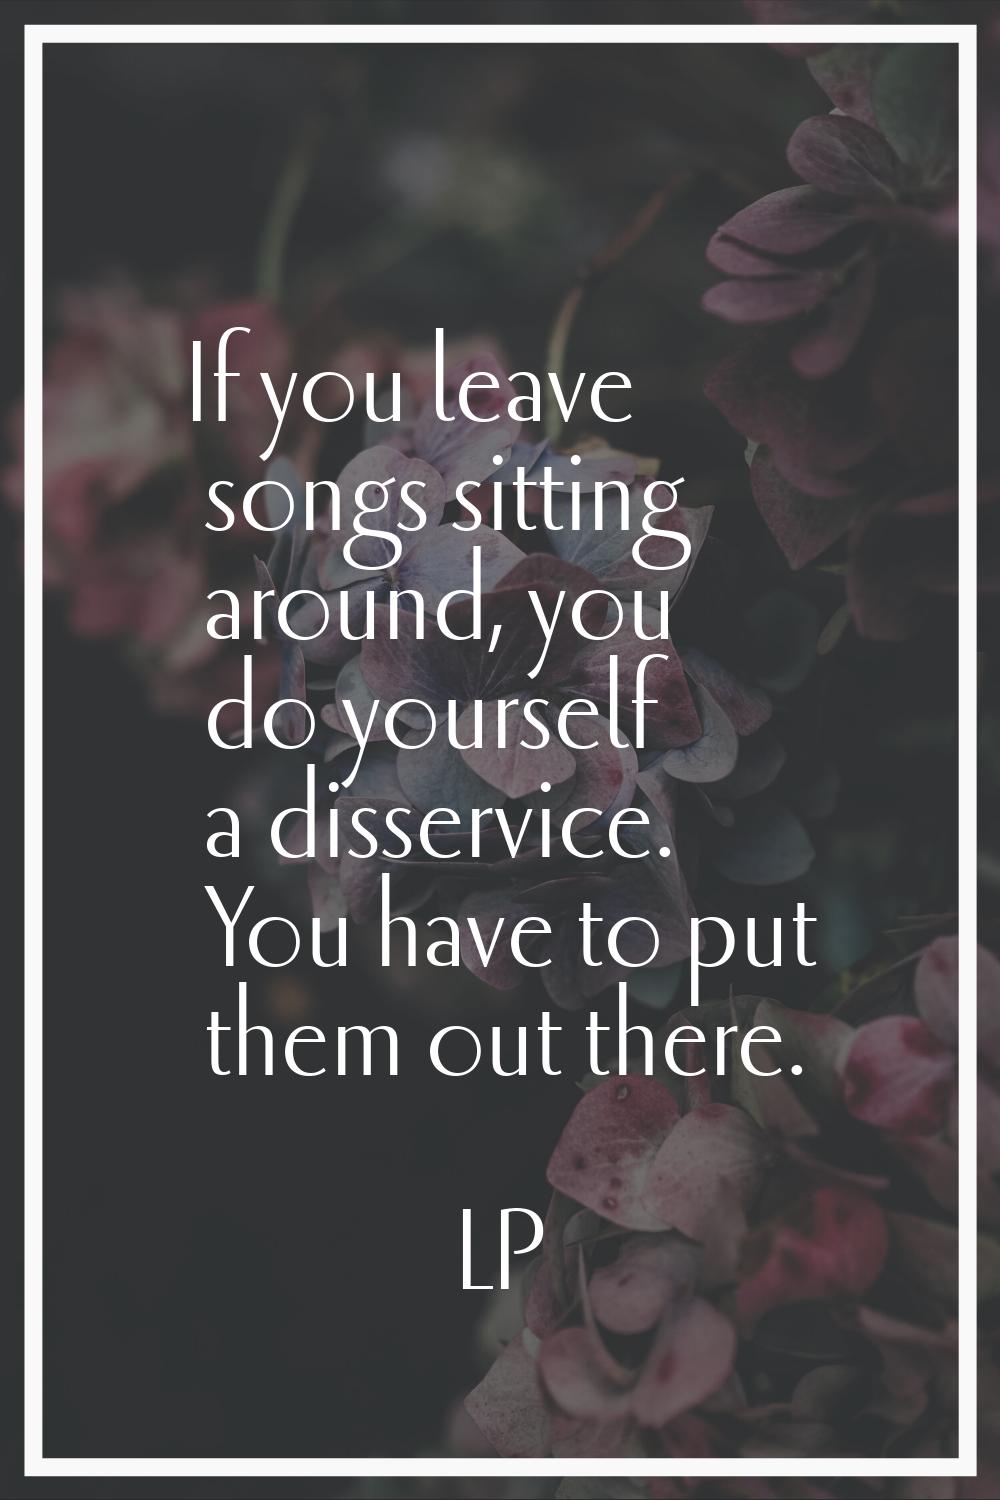 If you leave songs sitting around, you do yourself a disservice. You have to put them out there.